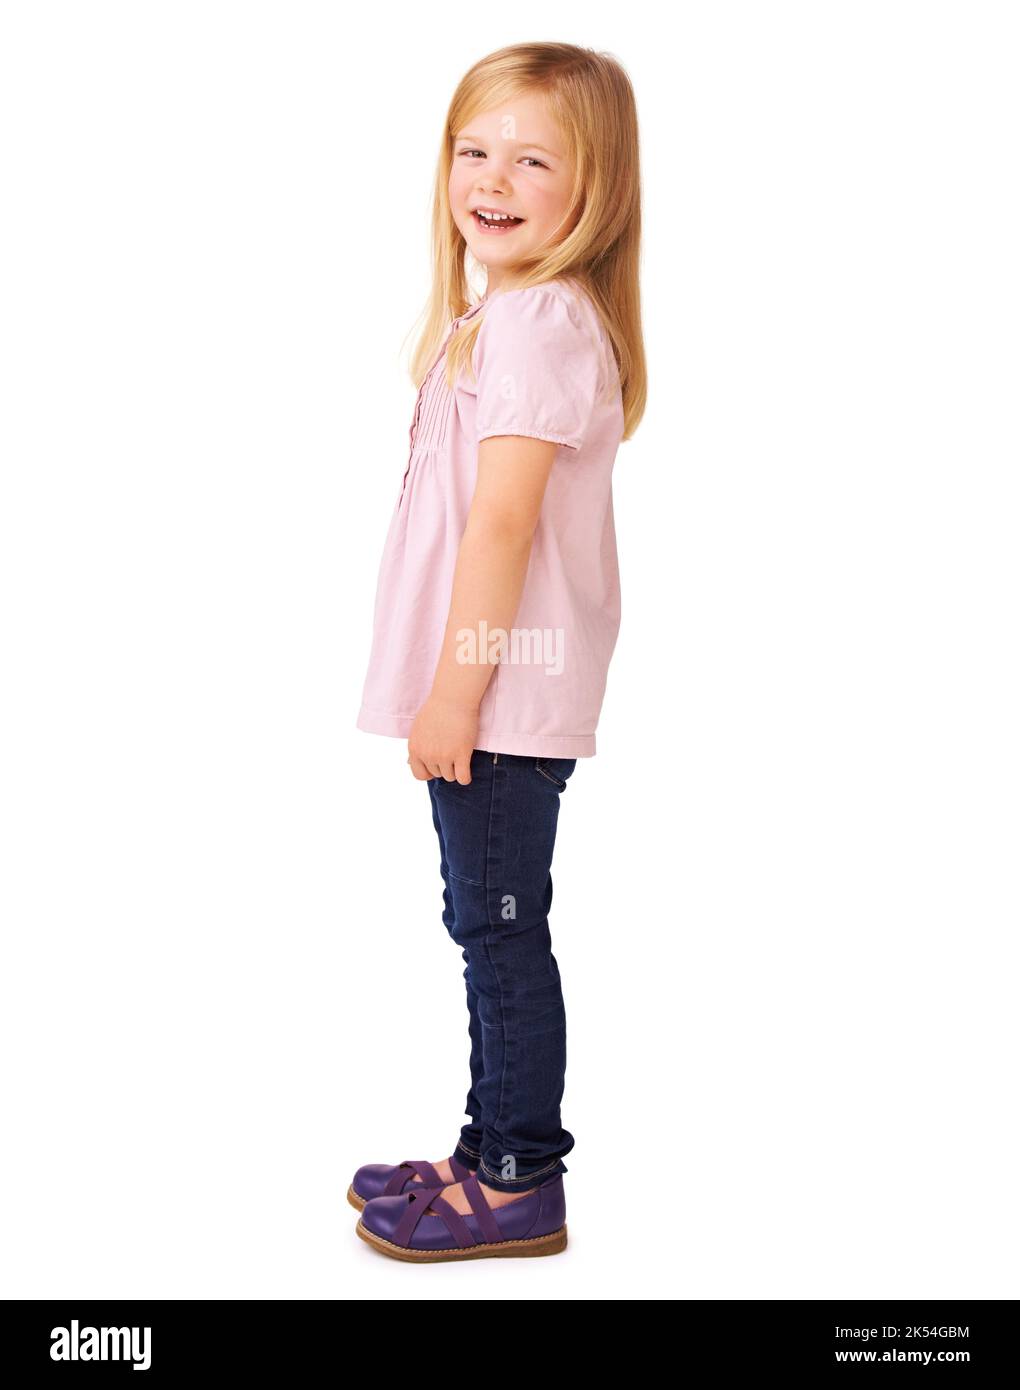 Comfortable being herself. Cute little girl standing confidently against a white background. Stock Photo